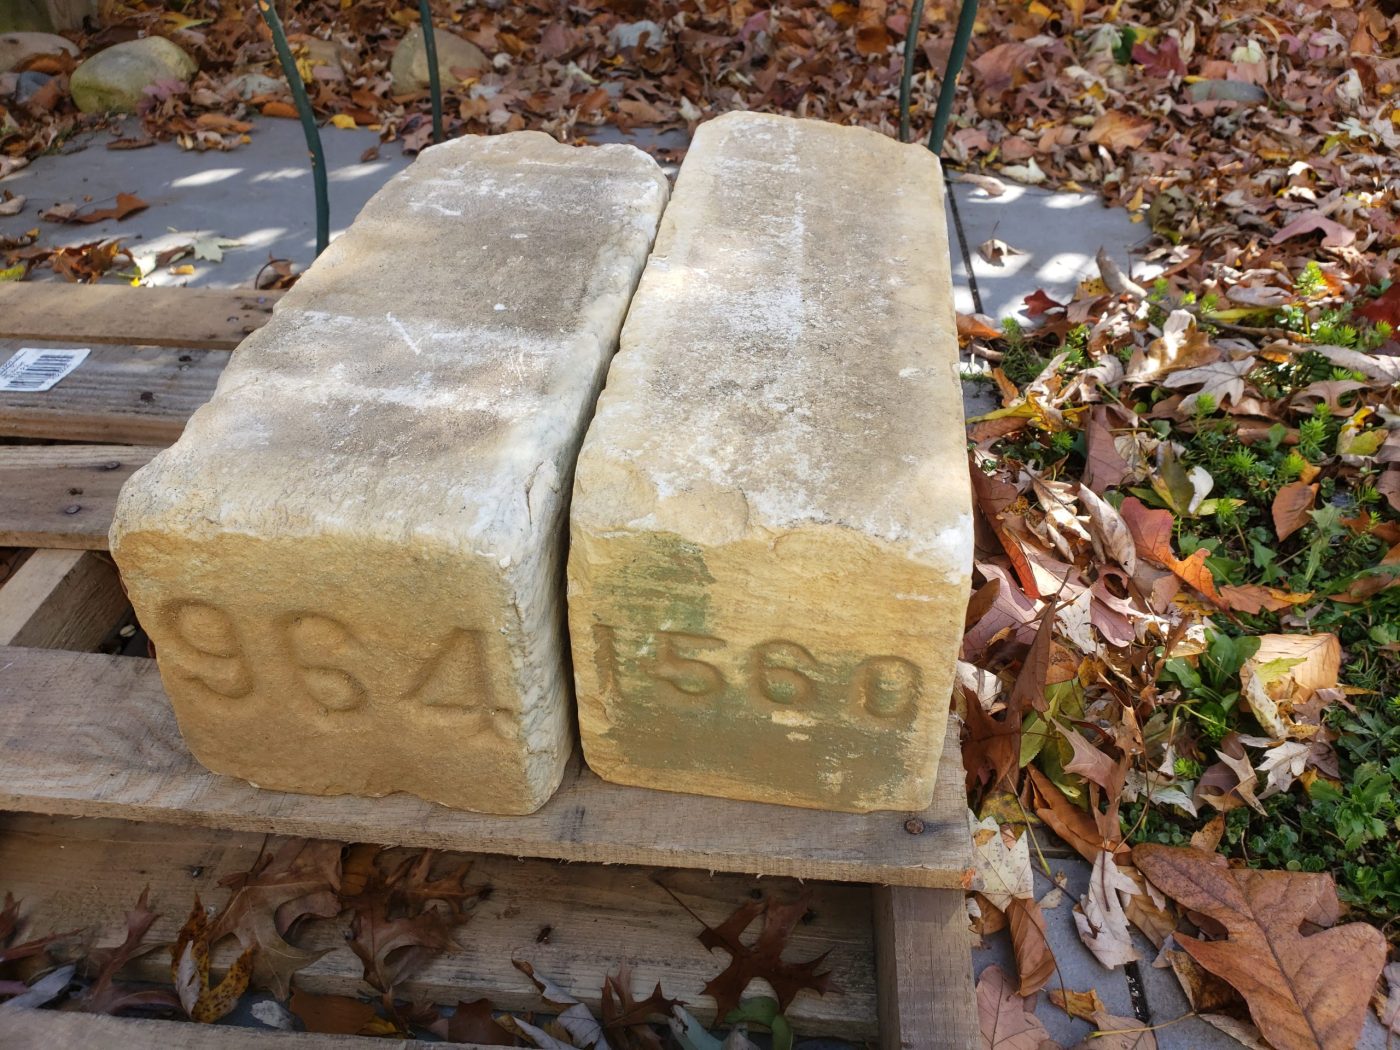 Two of the 6x6-inch stone markers from Annapolis National Cemetery evaluated by NCA historians and retained for the administration’s artifact collection in 2022. After the Civil War, the Army installed the markers at the gravesites of thousands of unidentified Union soldiers and sailors. (NCA)